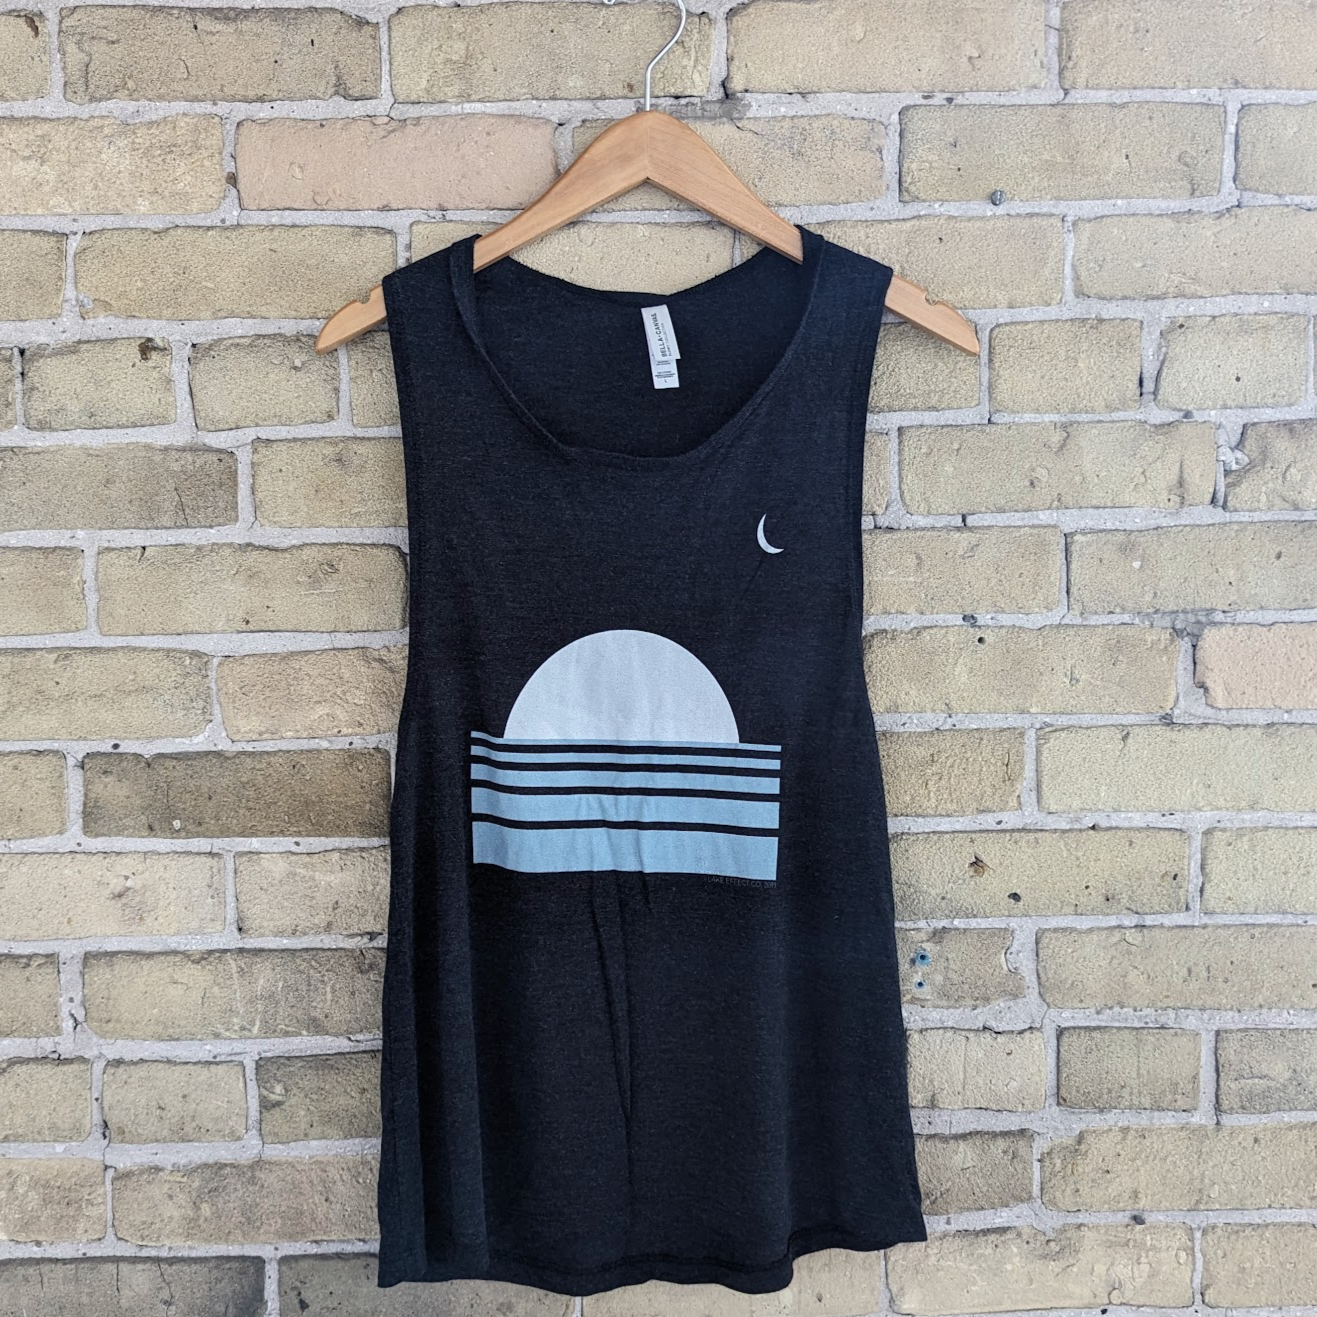 Sunset + Crescent Ladies’ Muscle Tank